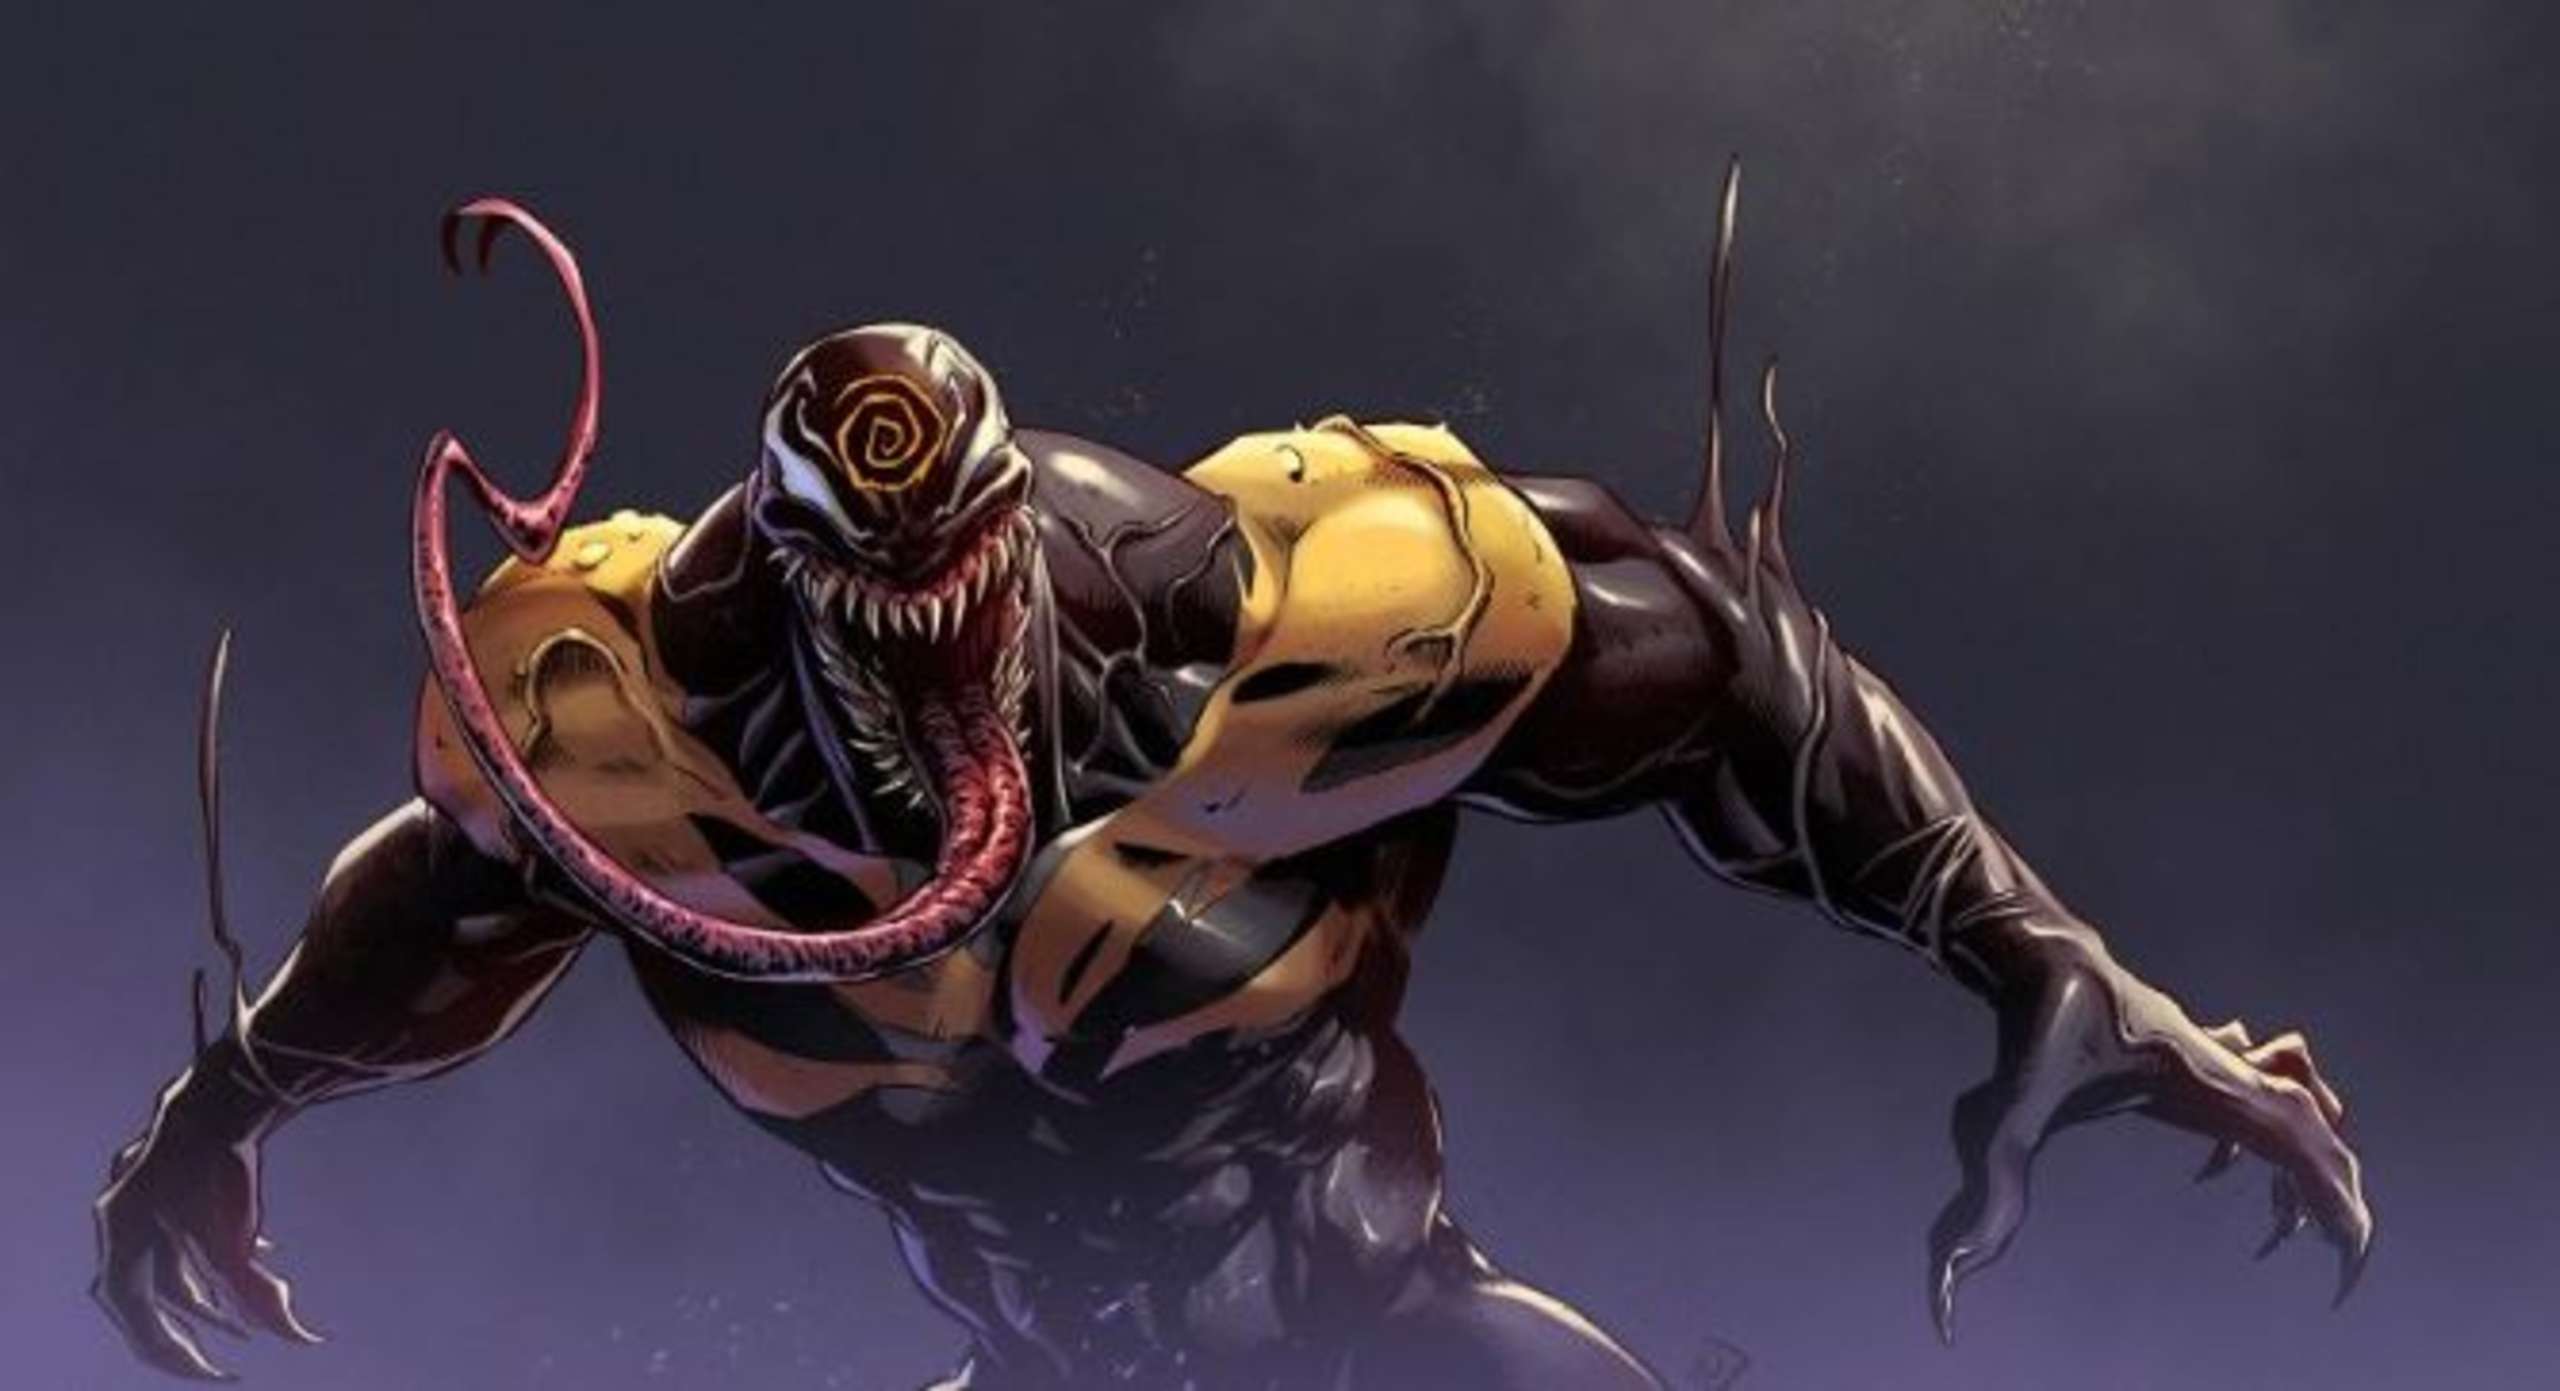 After The Initial Release, Marvel’s Midnight Suns Will Receive A Large Batch Of Downloadable Content Featuring Playable Heroes Like Storm And Venom